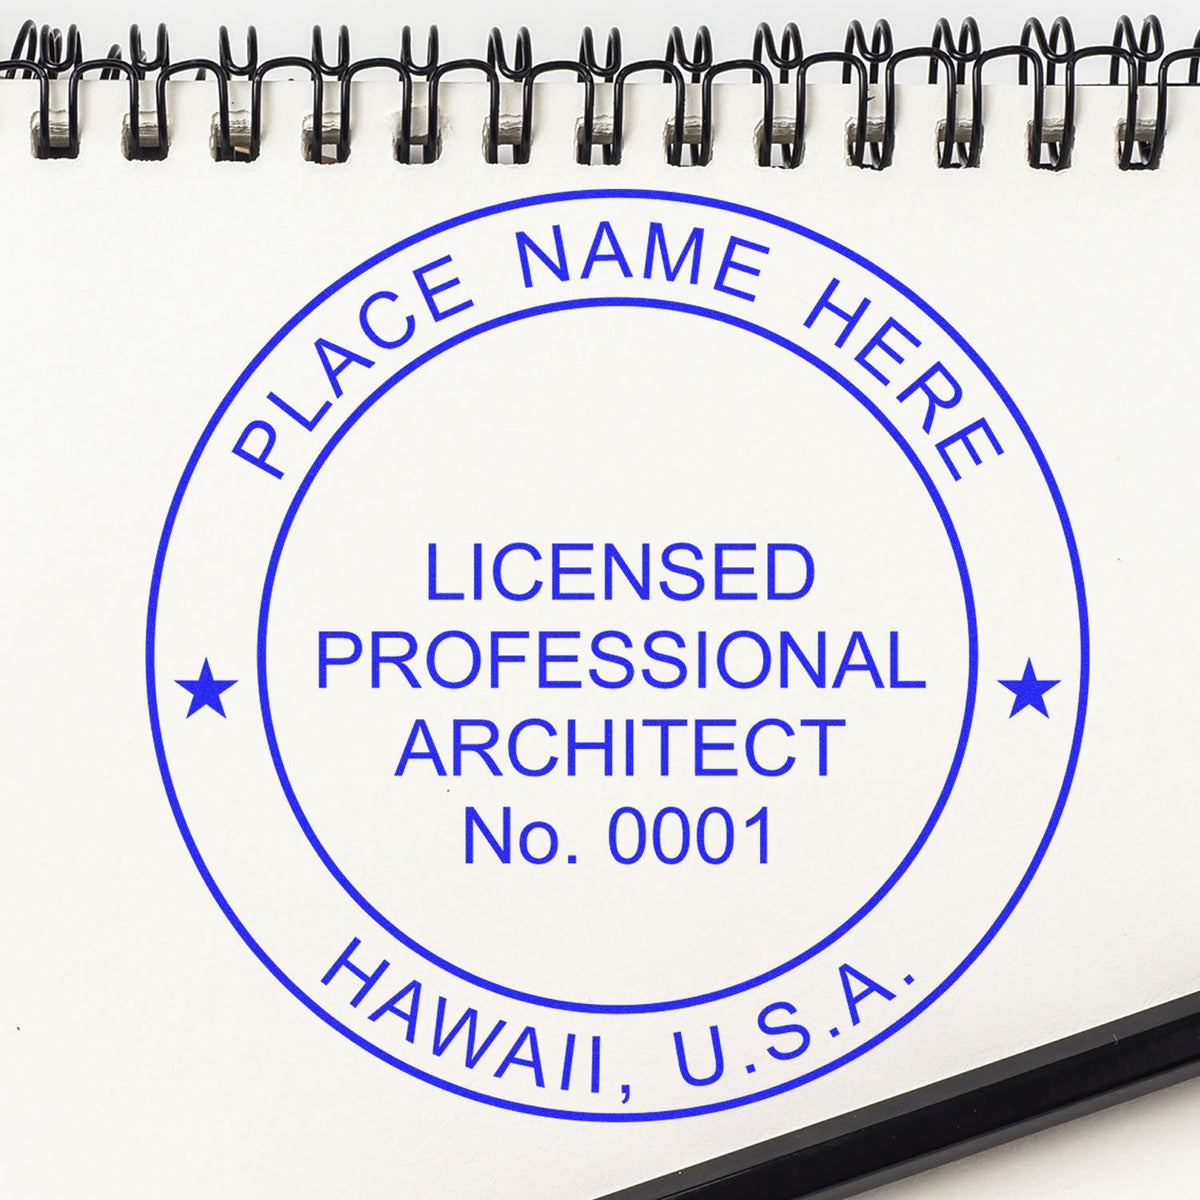 Slim Pre-Inked Hawaii Architect Seal Stamp in use photo showing a stamped imprint of the Slim Pre-Inked Hawaii Architect Seal Stamp